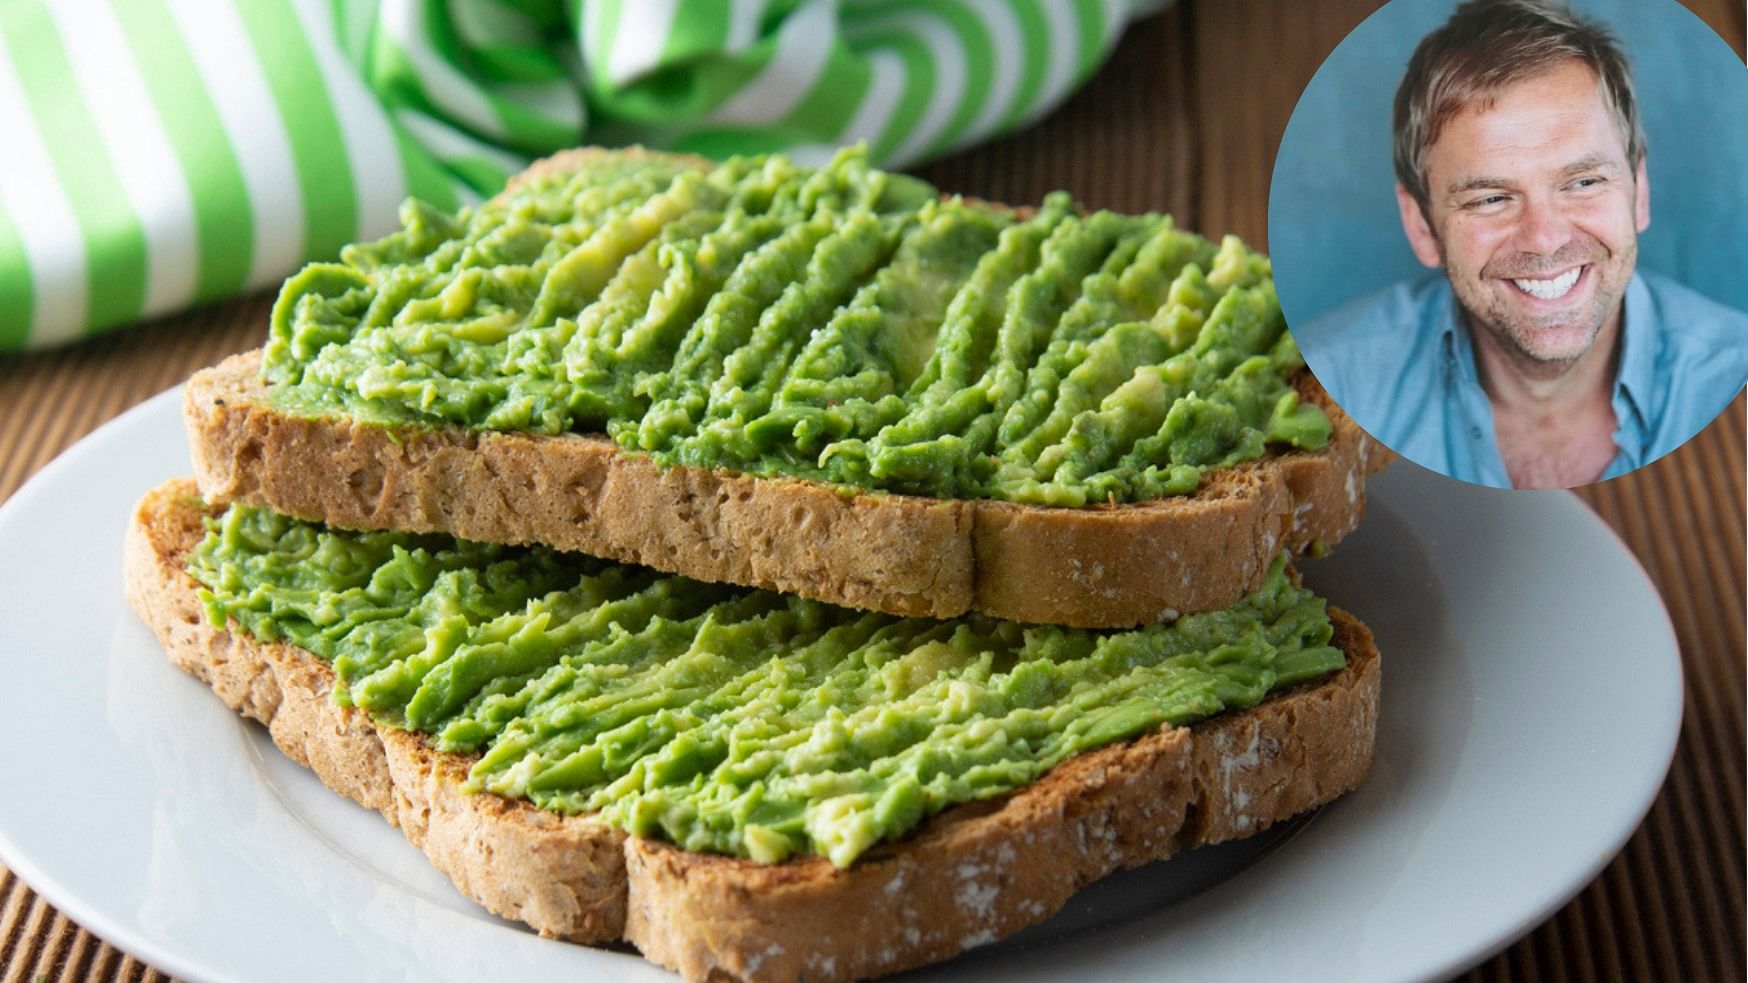 <div class="paragraphs"><p>Representative image showing avocado toast along with a photo of Bill Granger the late chef credited with popularizing the dish.</p></div>